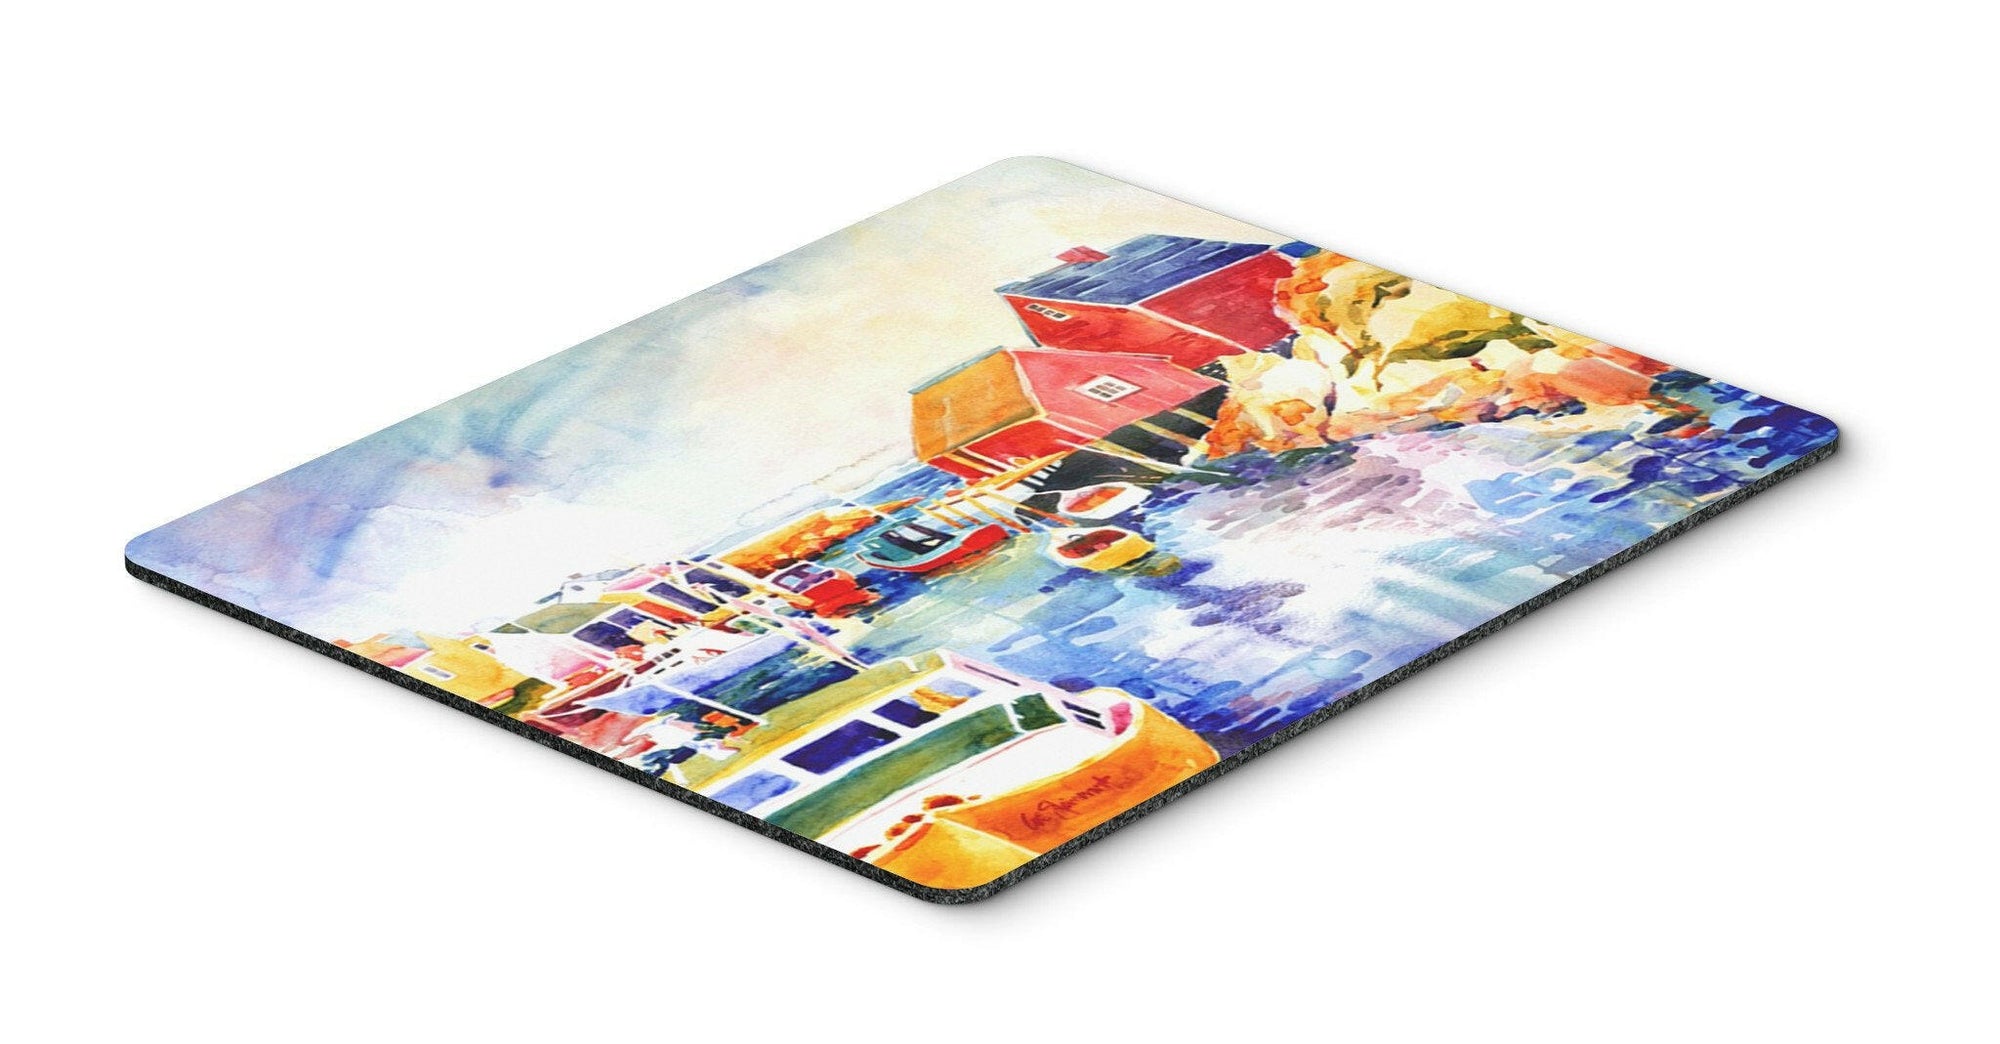 Boats at Harbour with a view Mouse pad, hot pad, or trivet by Caroline's Treasures